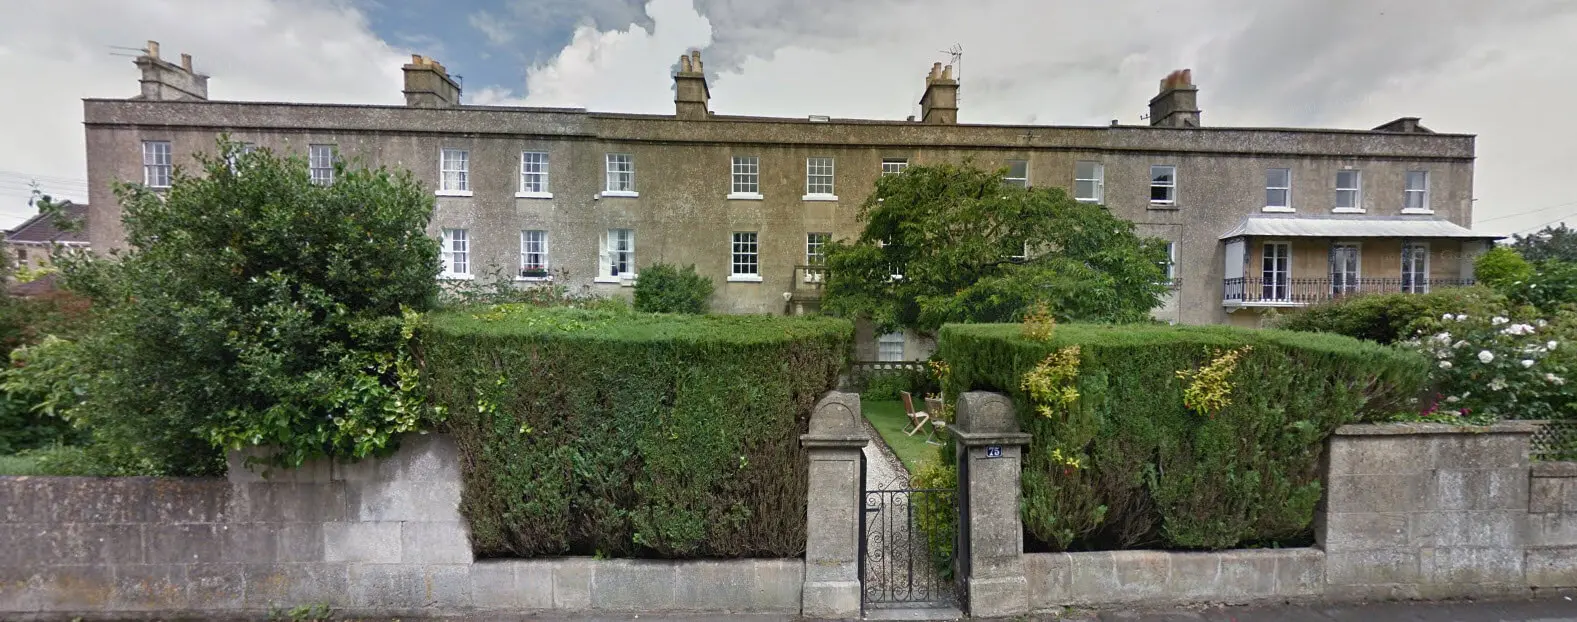 isabella place combe down